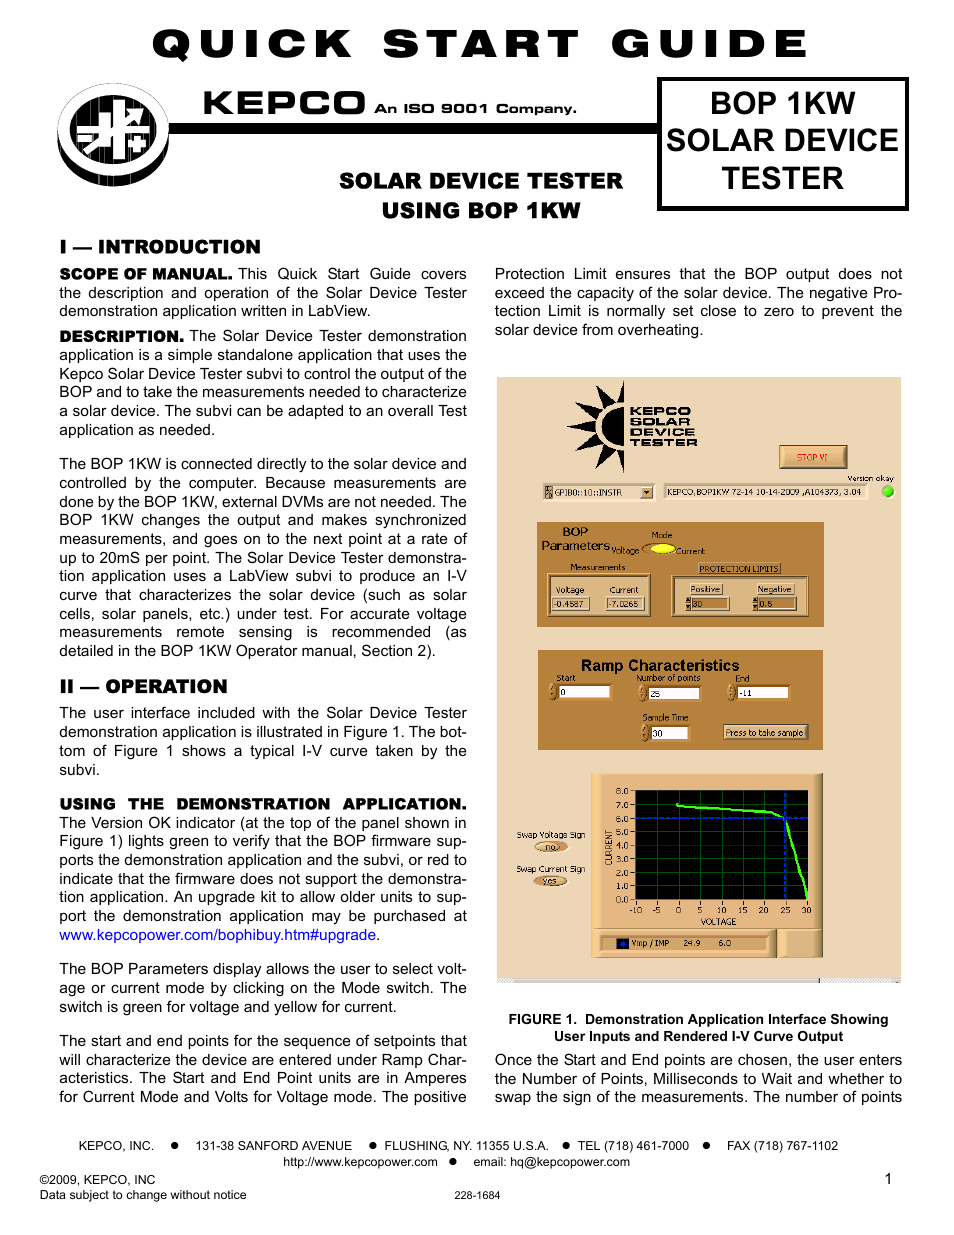 BOP 1KW as Solar Device Tester Quick Start Guide